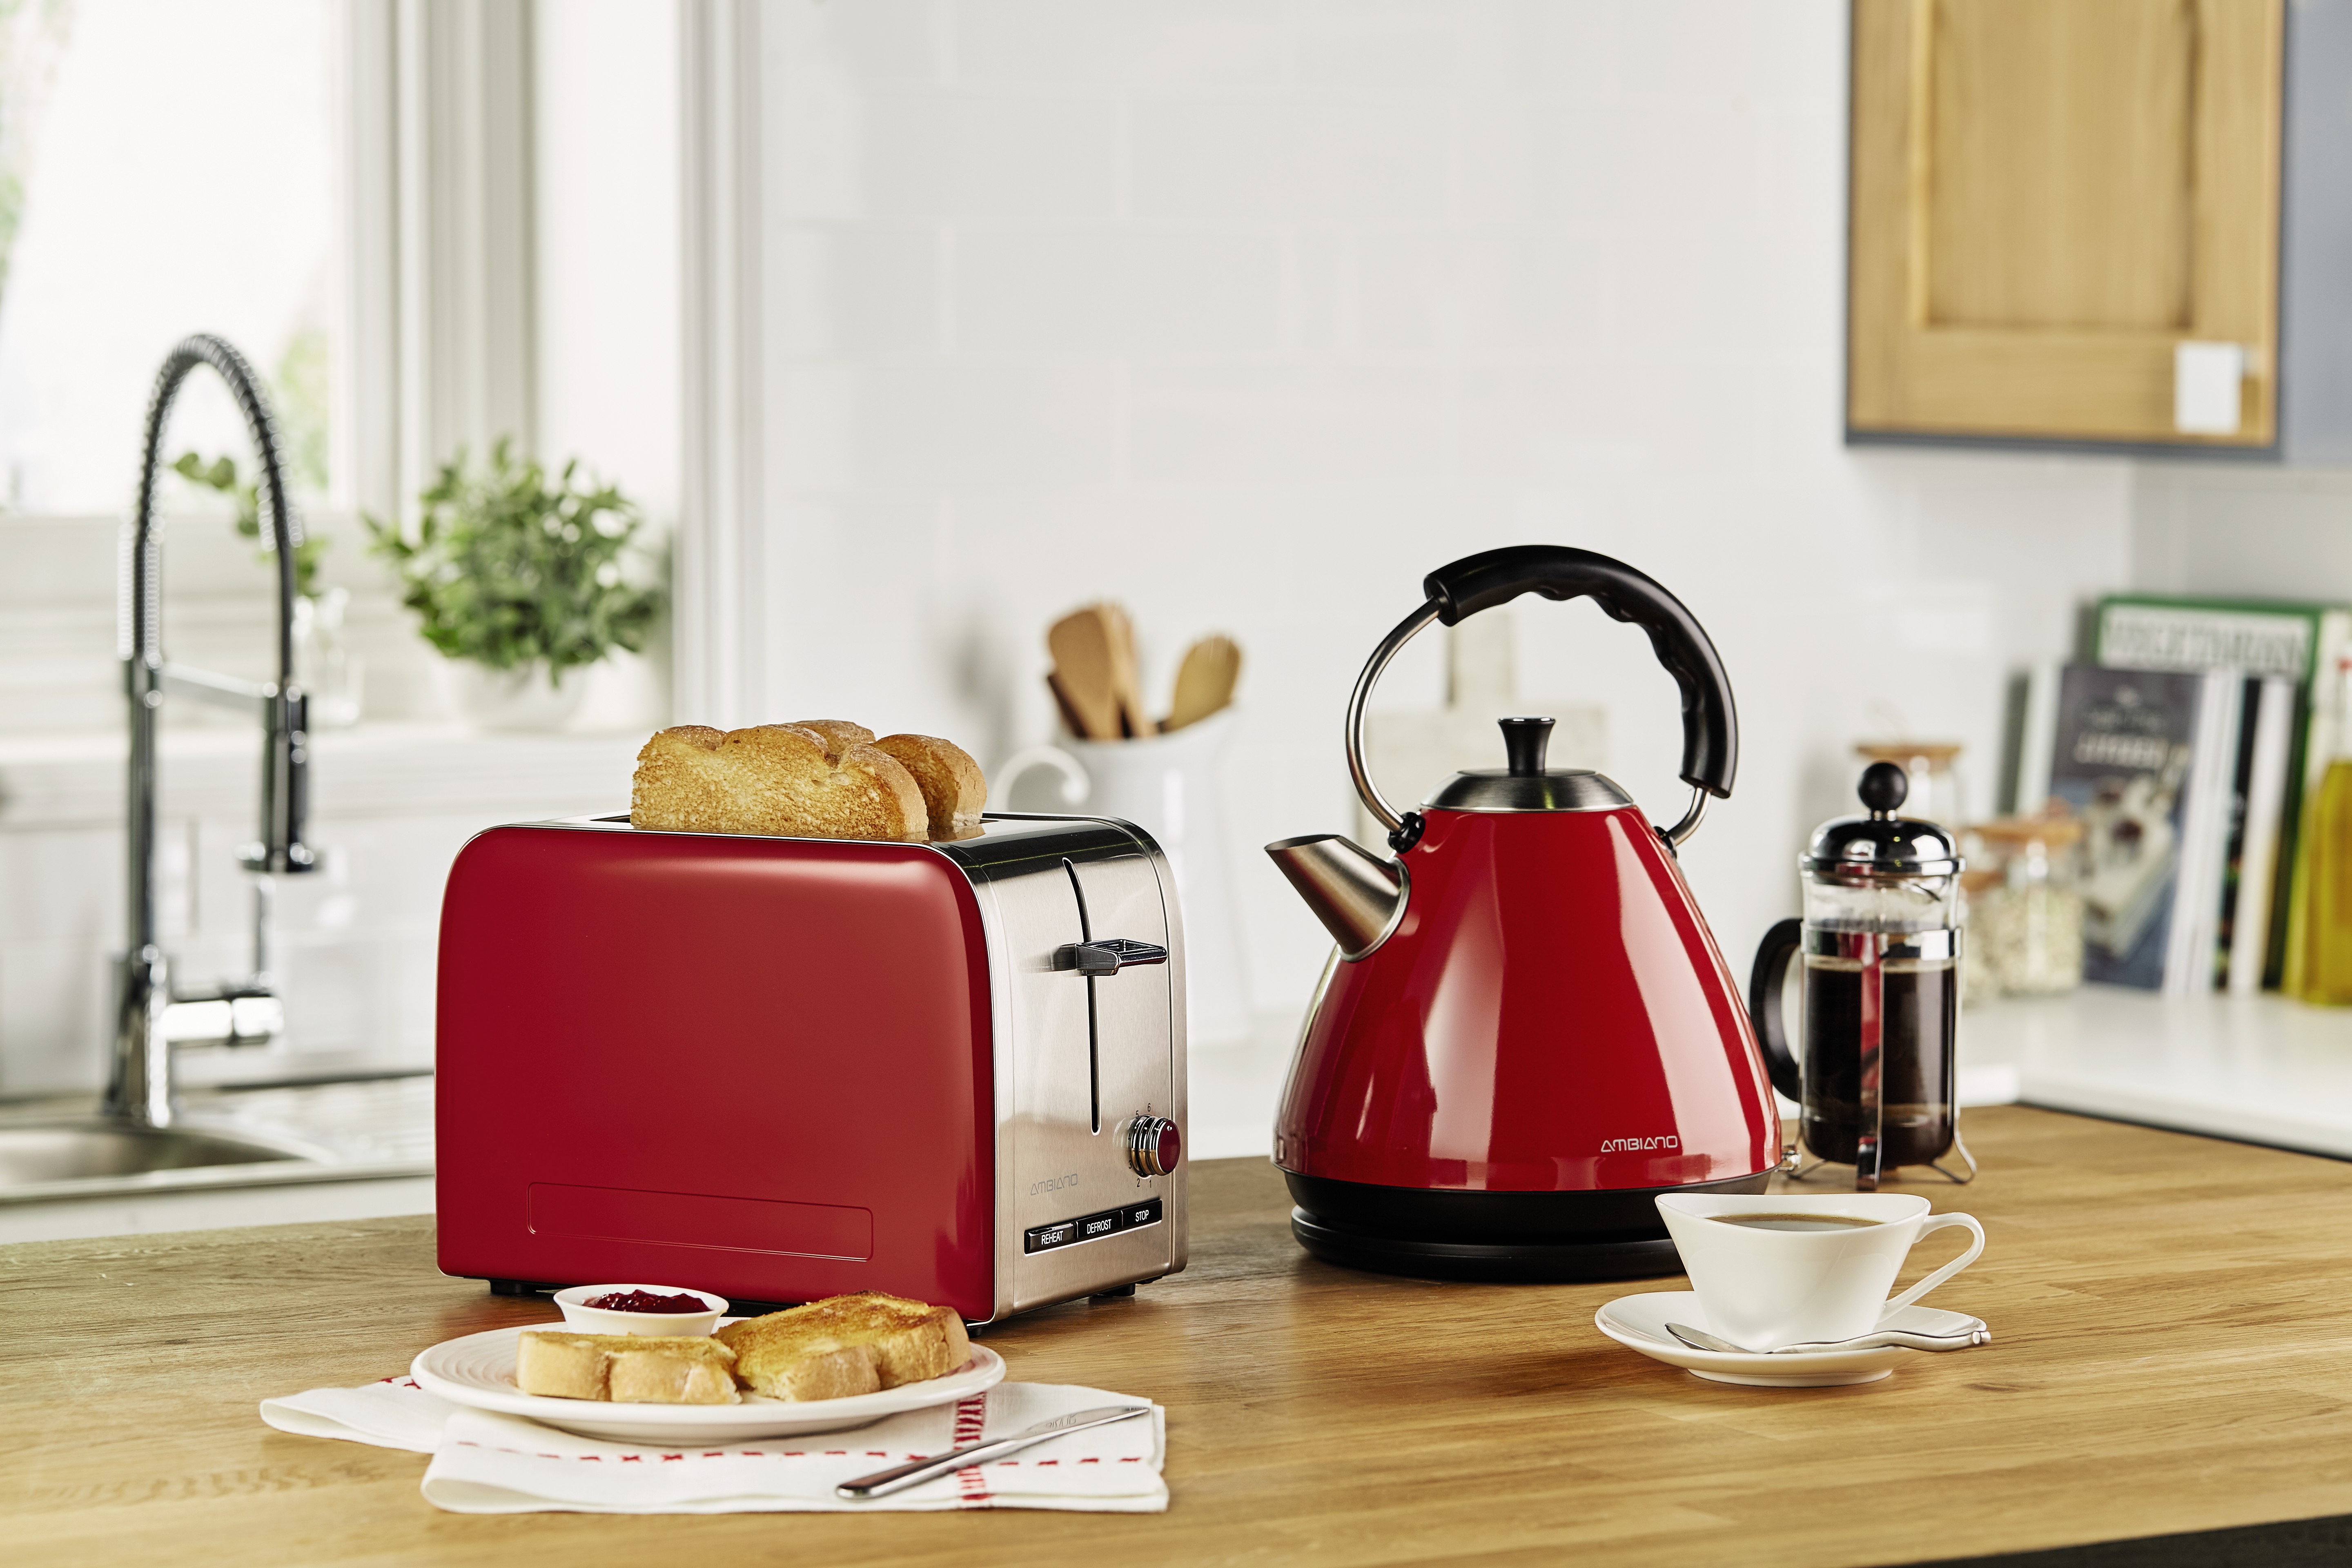 Aldis Latest Special Buys Include Some Retro Style Kitchen Appliances Houseandhomeie